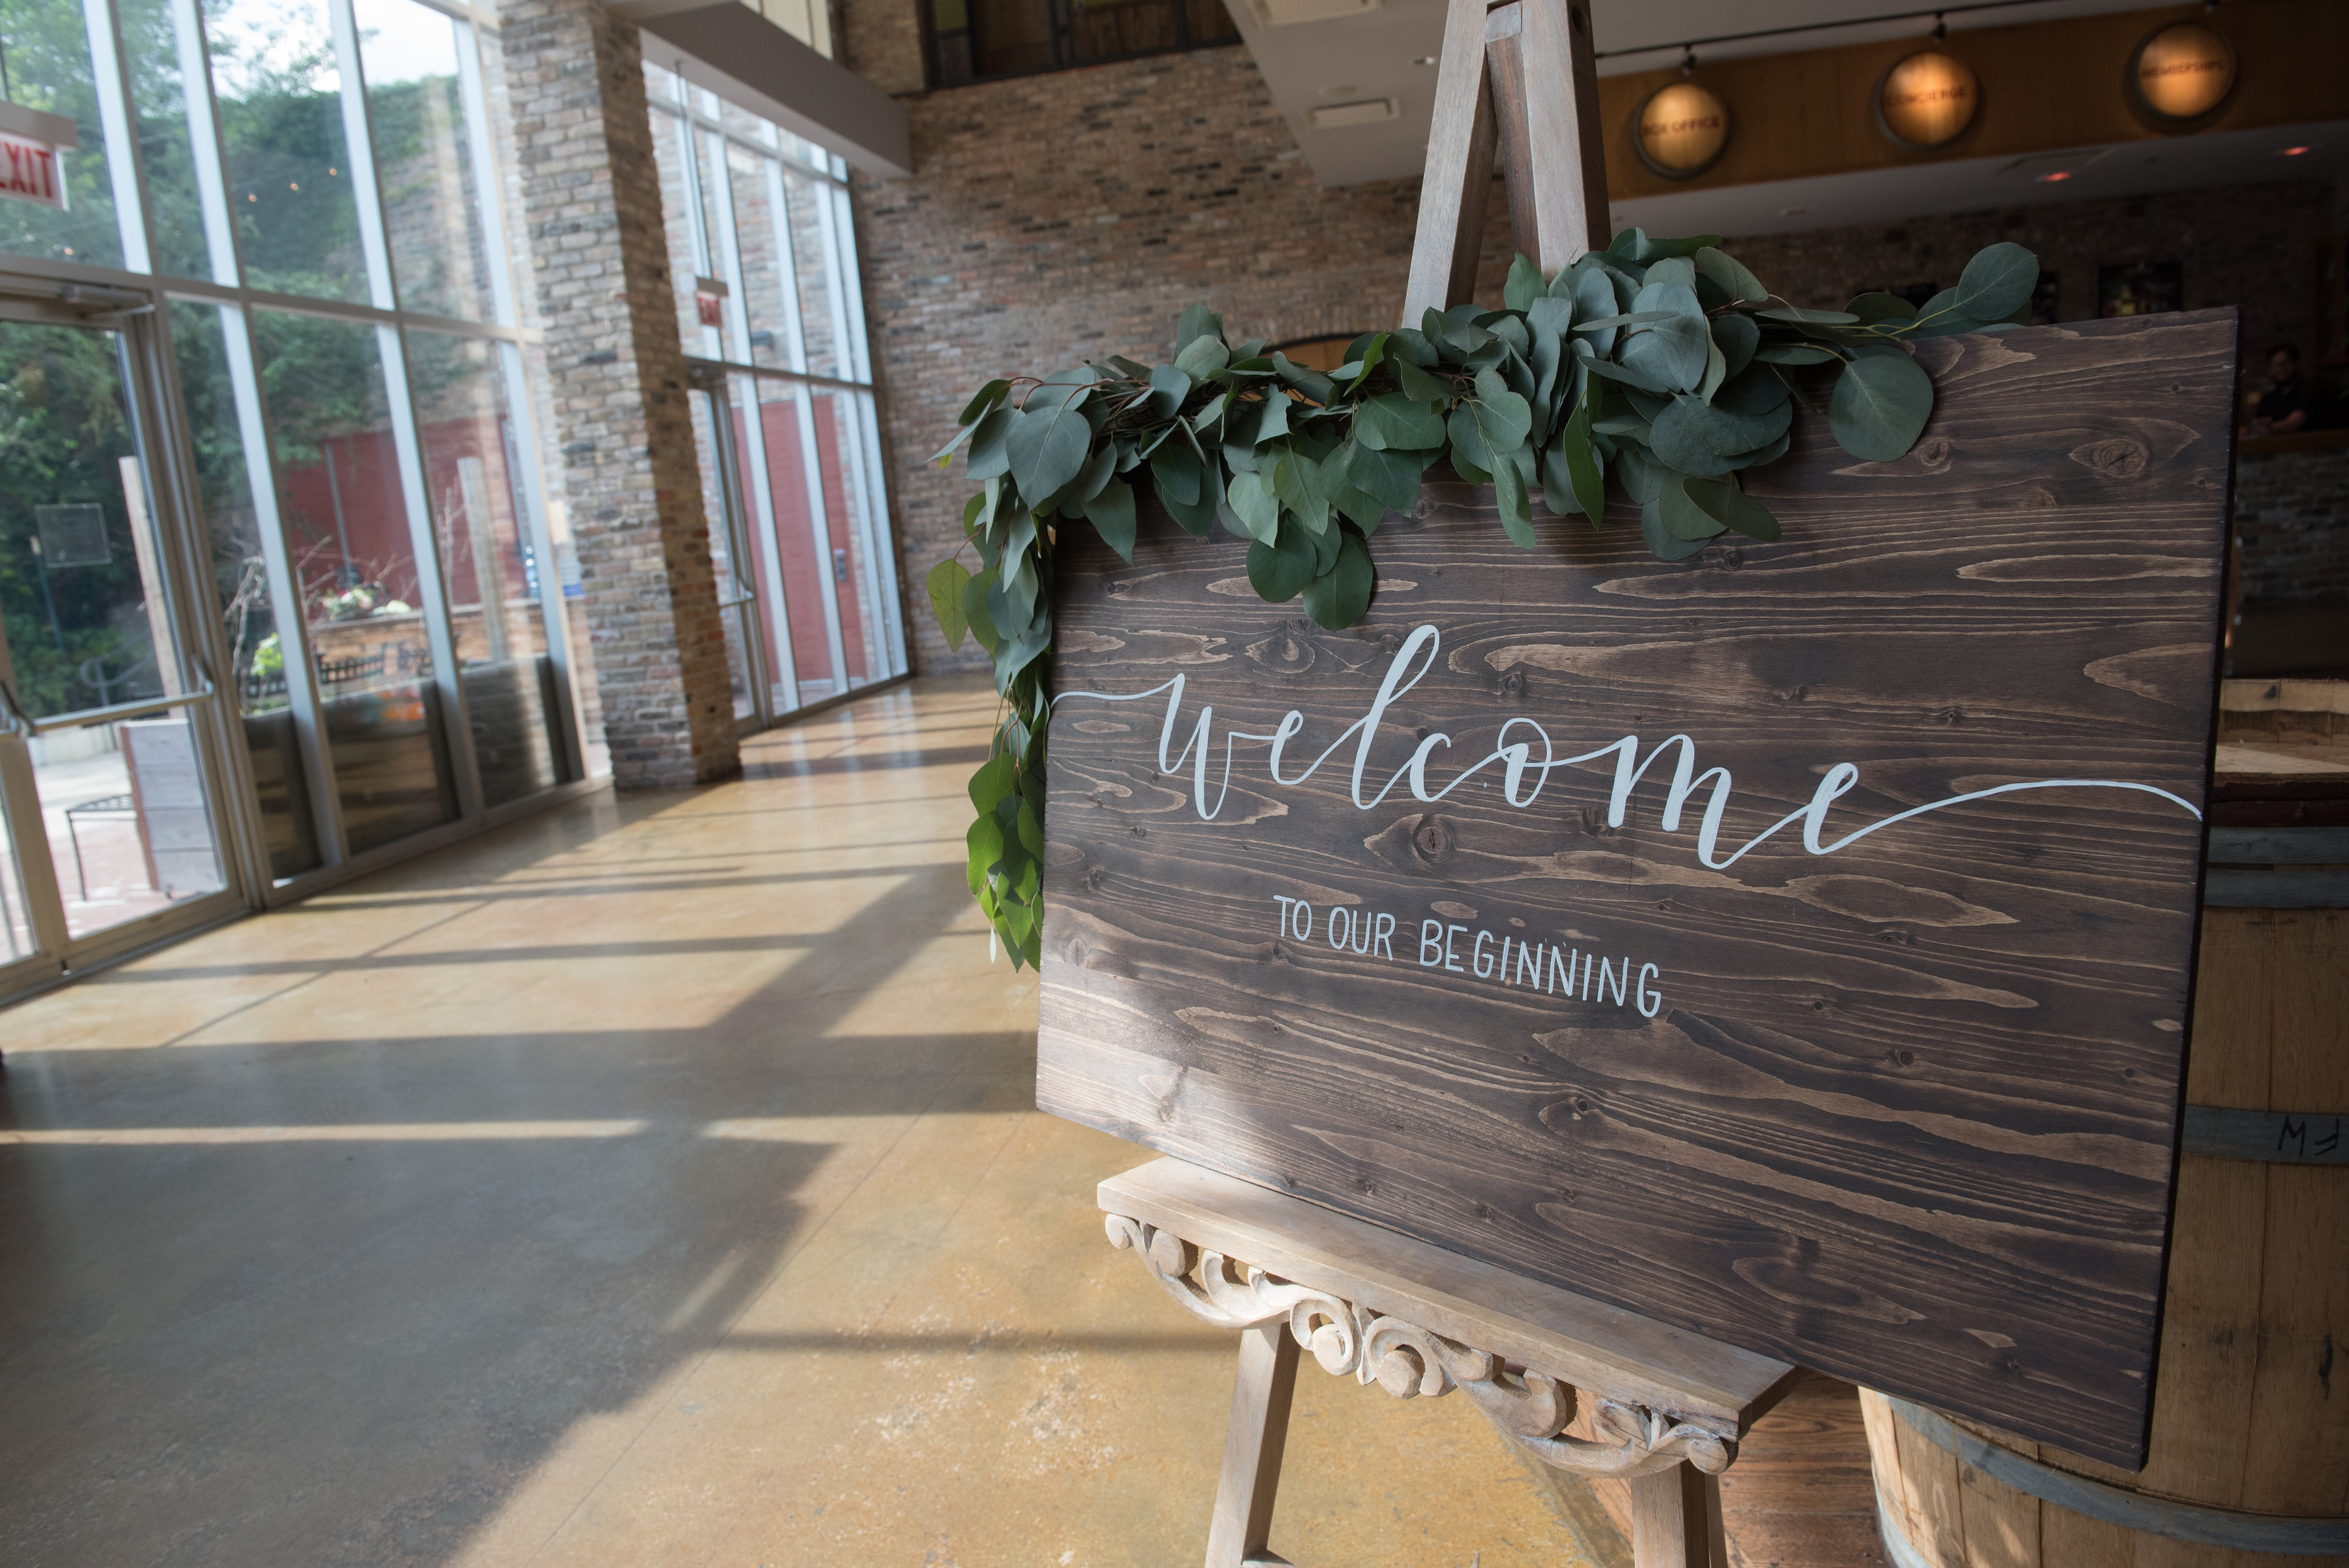 Welcome to our beginning rustic wedding sign with foliage at City Winery.